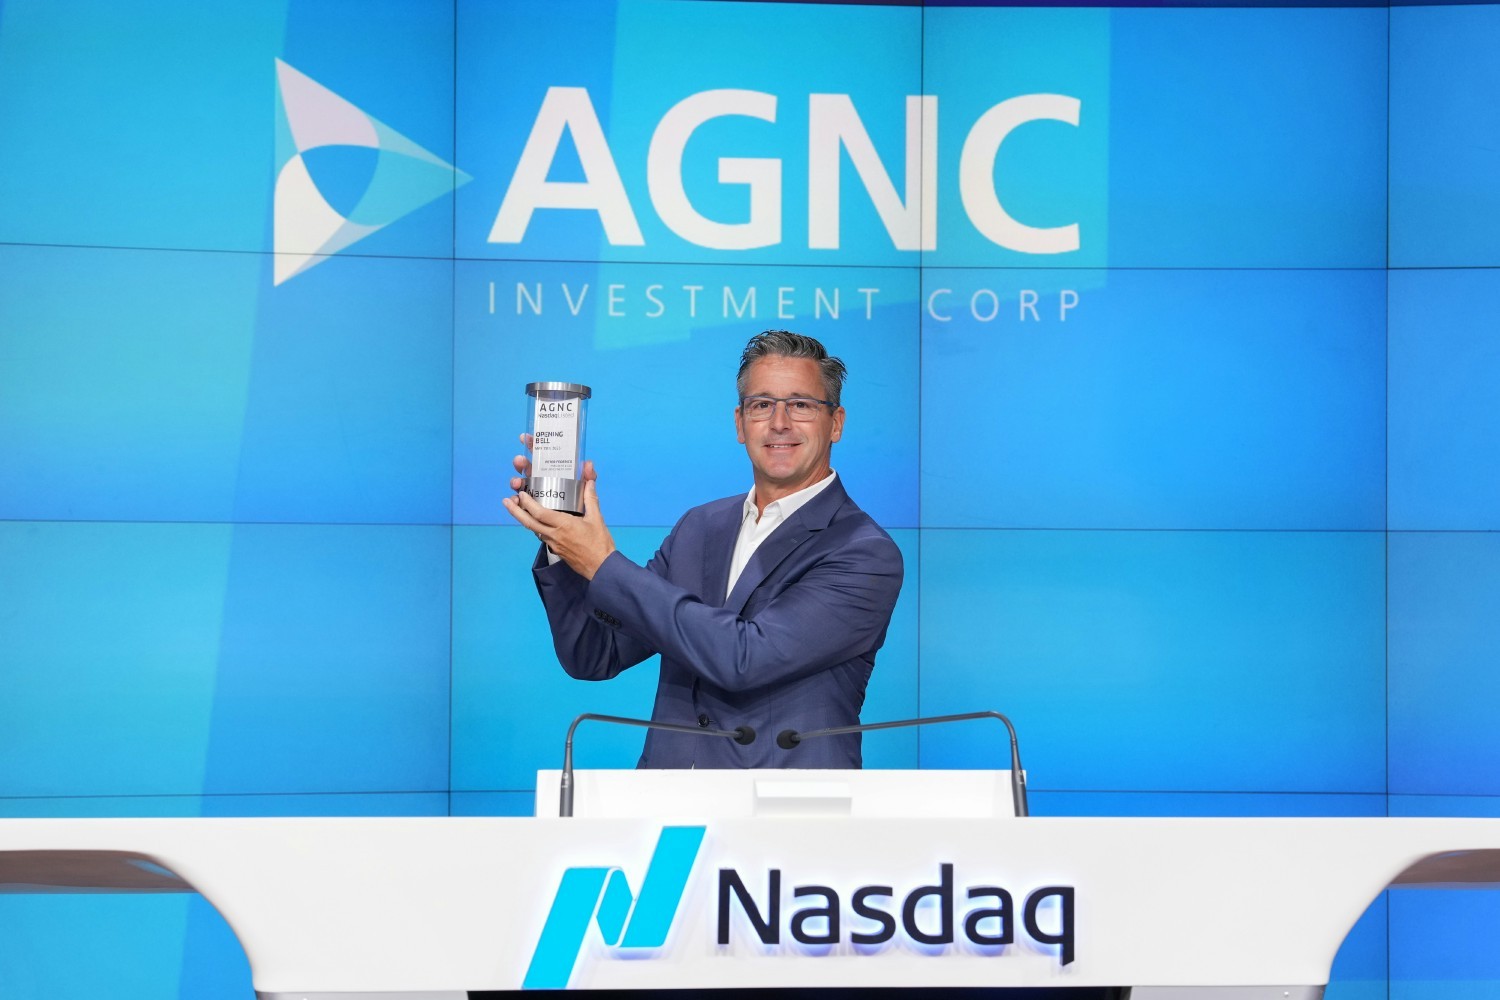 AGNC Investment Corp.'s President and CEO Peter Federico